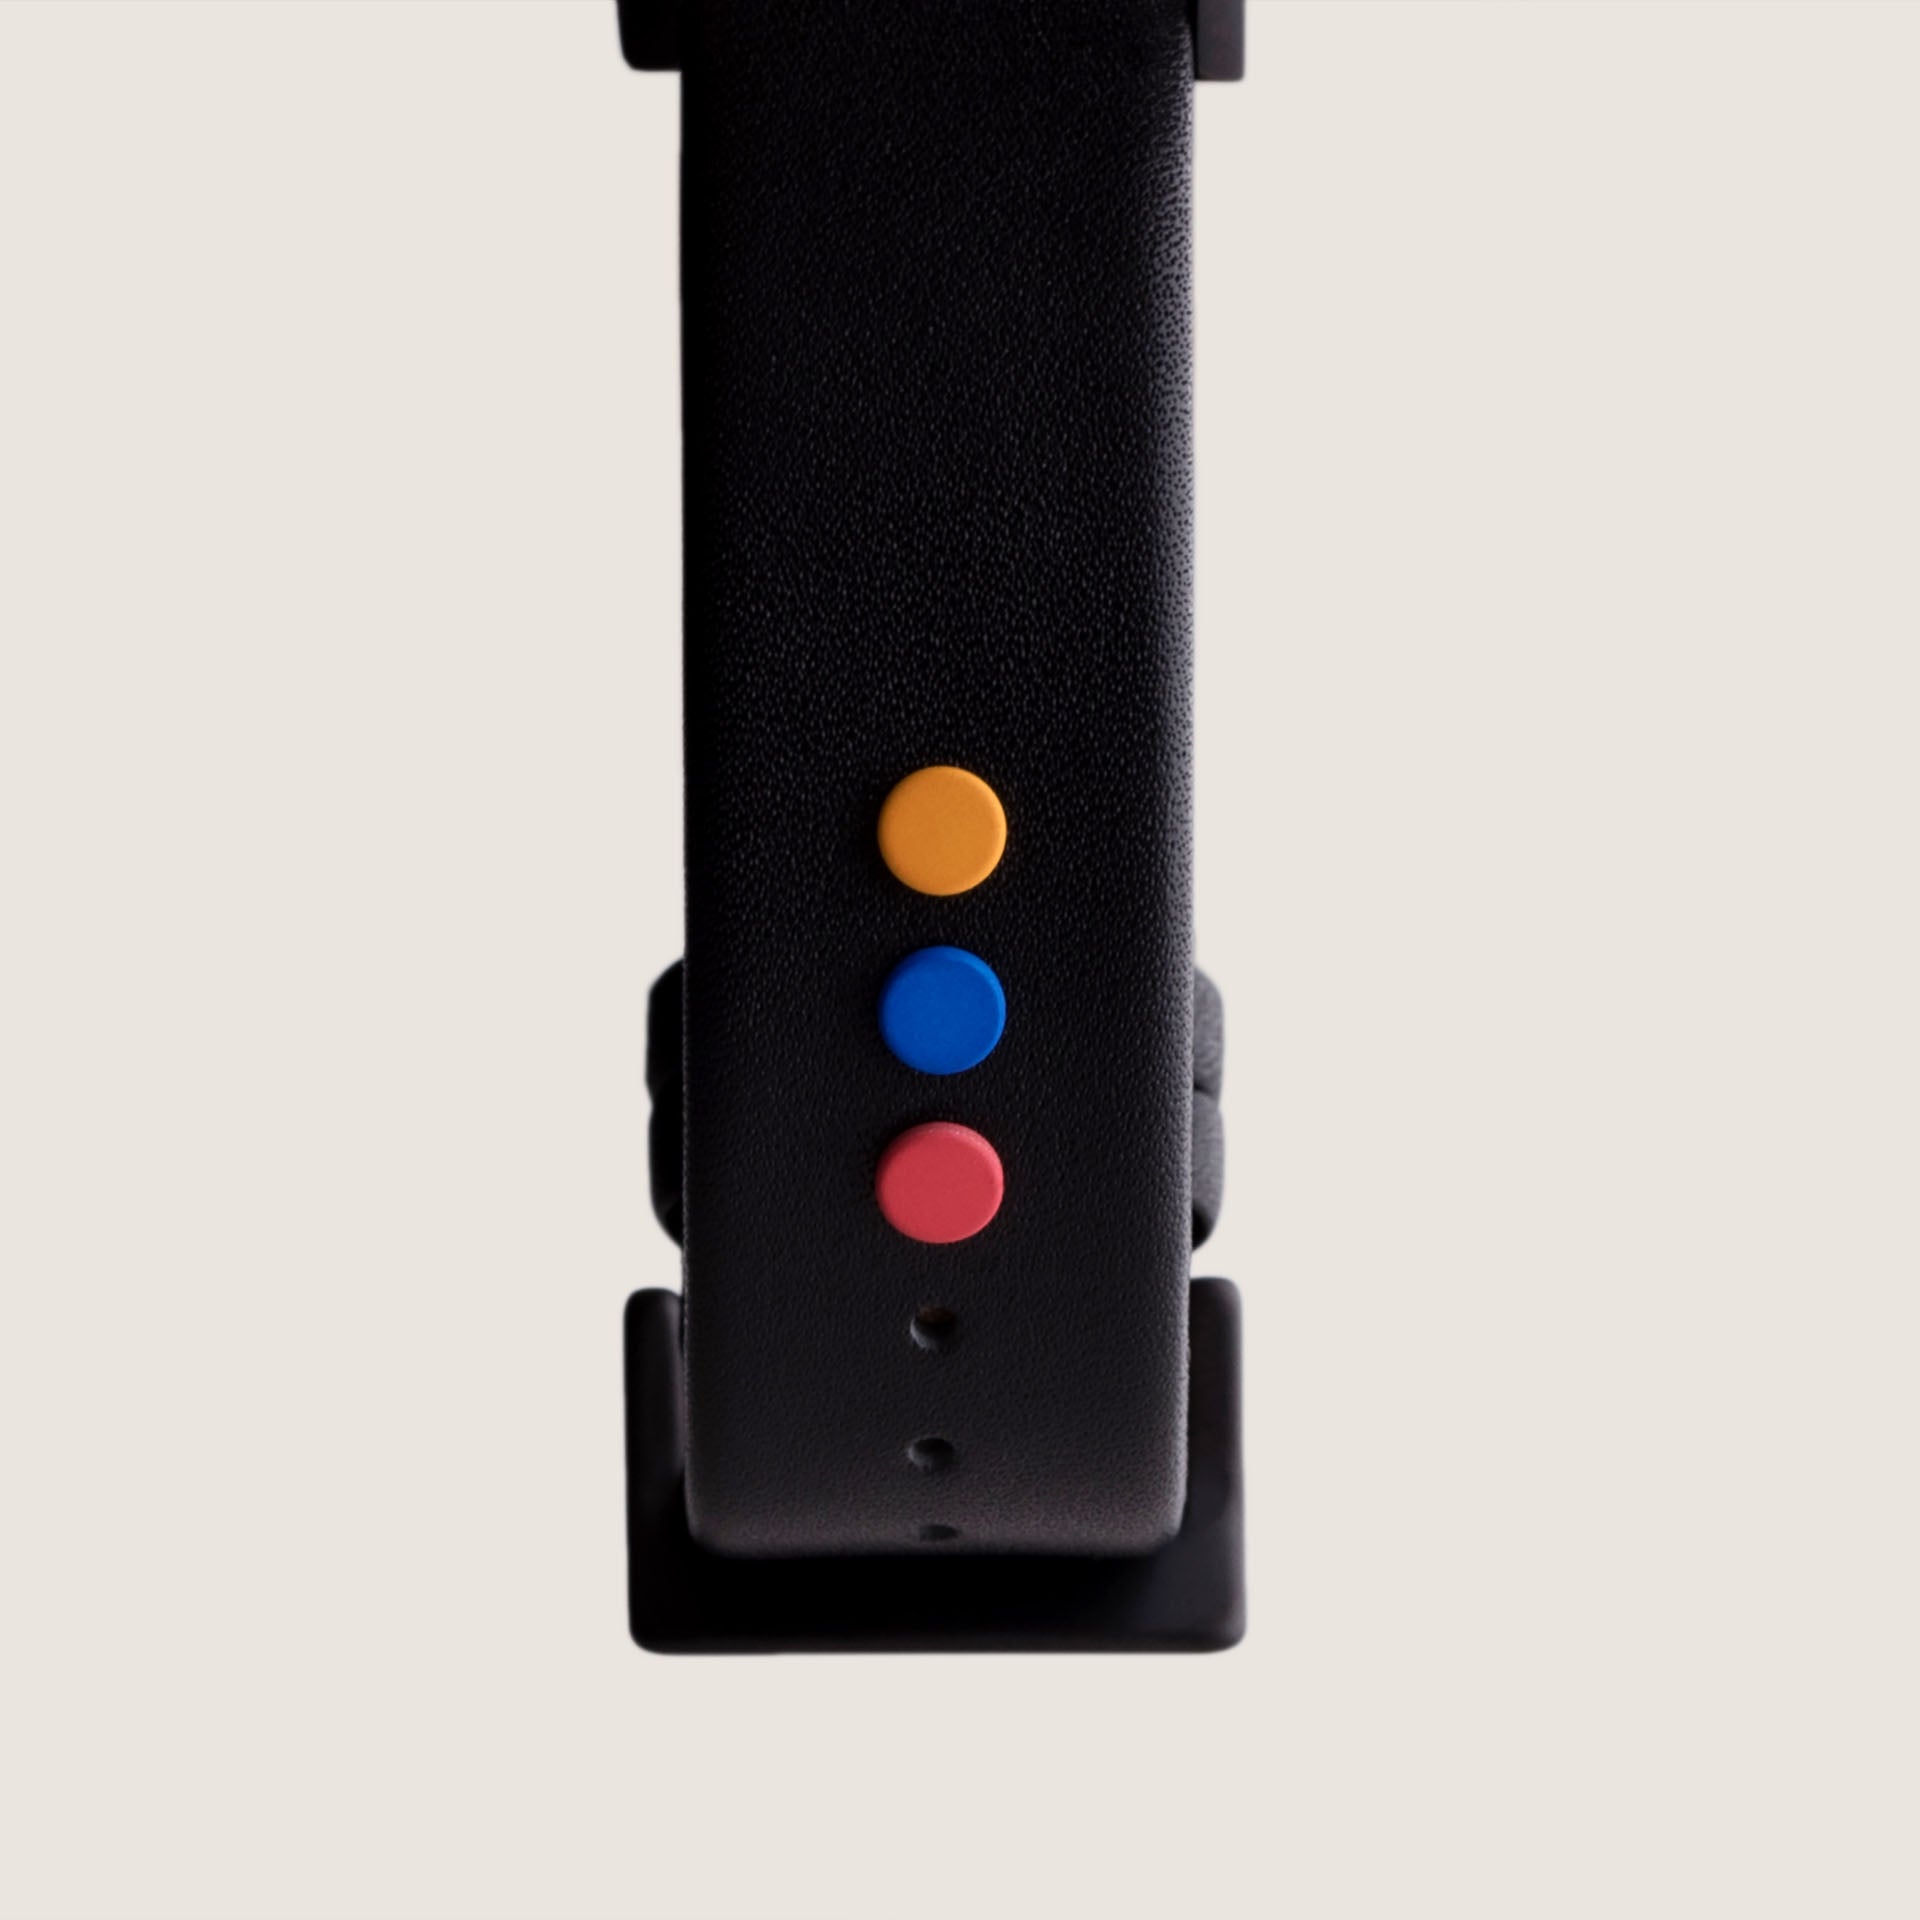 Anicorn - Leather strap with planet buttons